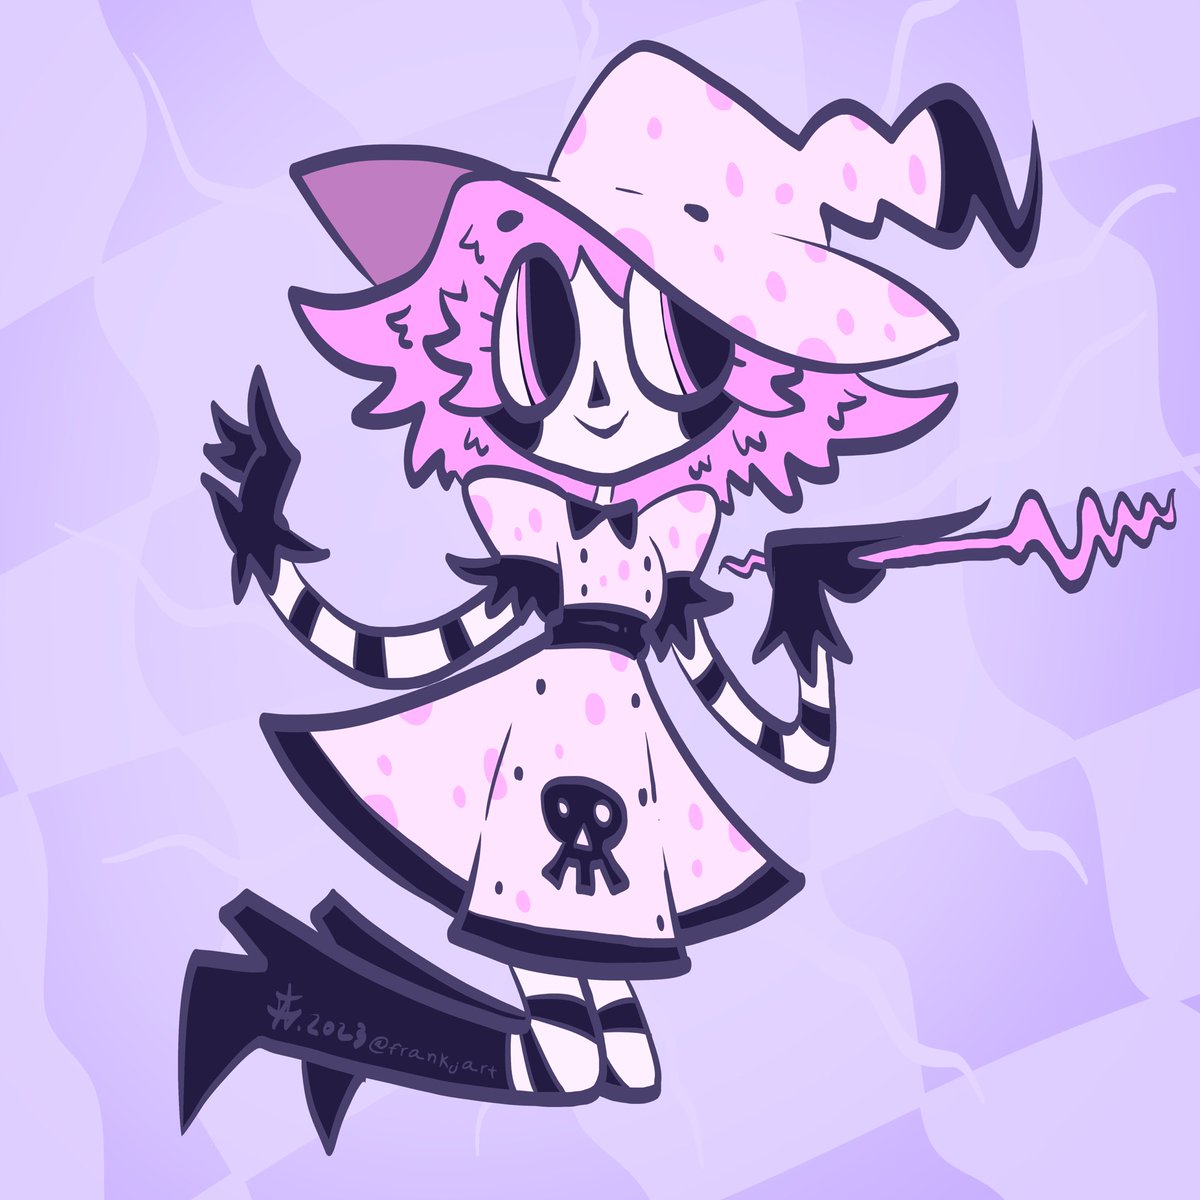 Verily Pastel Witchy 💜💕
#goth #cute #kuromicore #pastelgoth #pastelaesthetic #oc #witch #witchy #witchgirl #trans #transartist #kawaiigirl #doodle #spooky #purple #pink